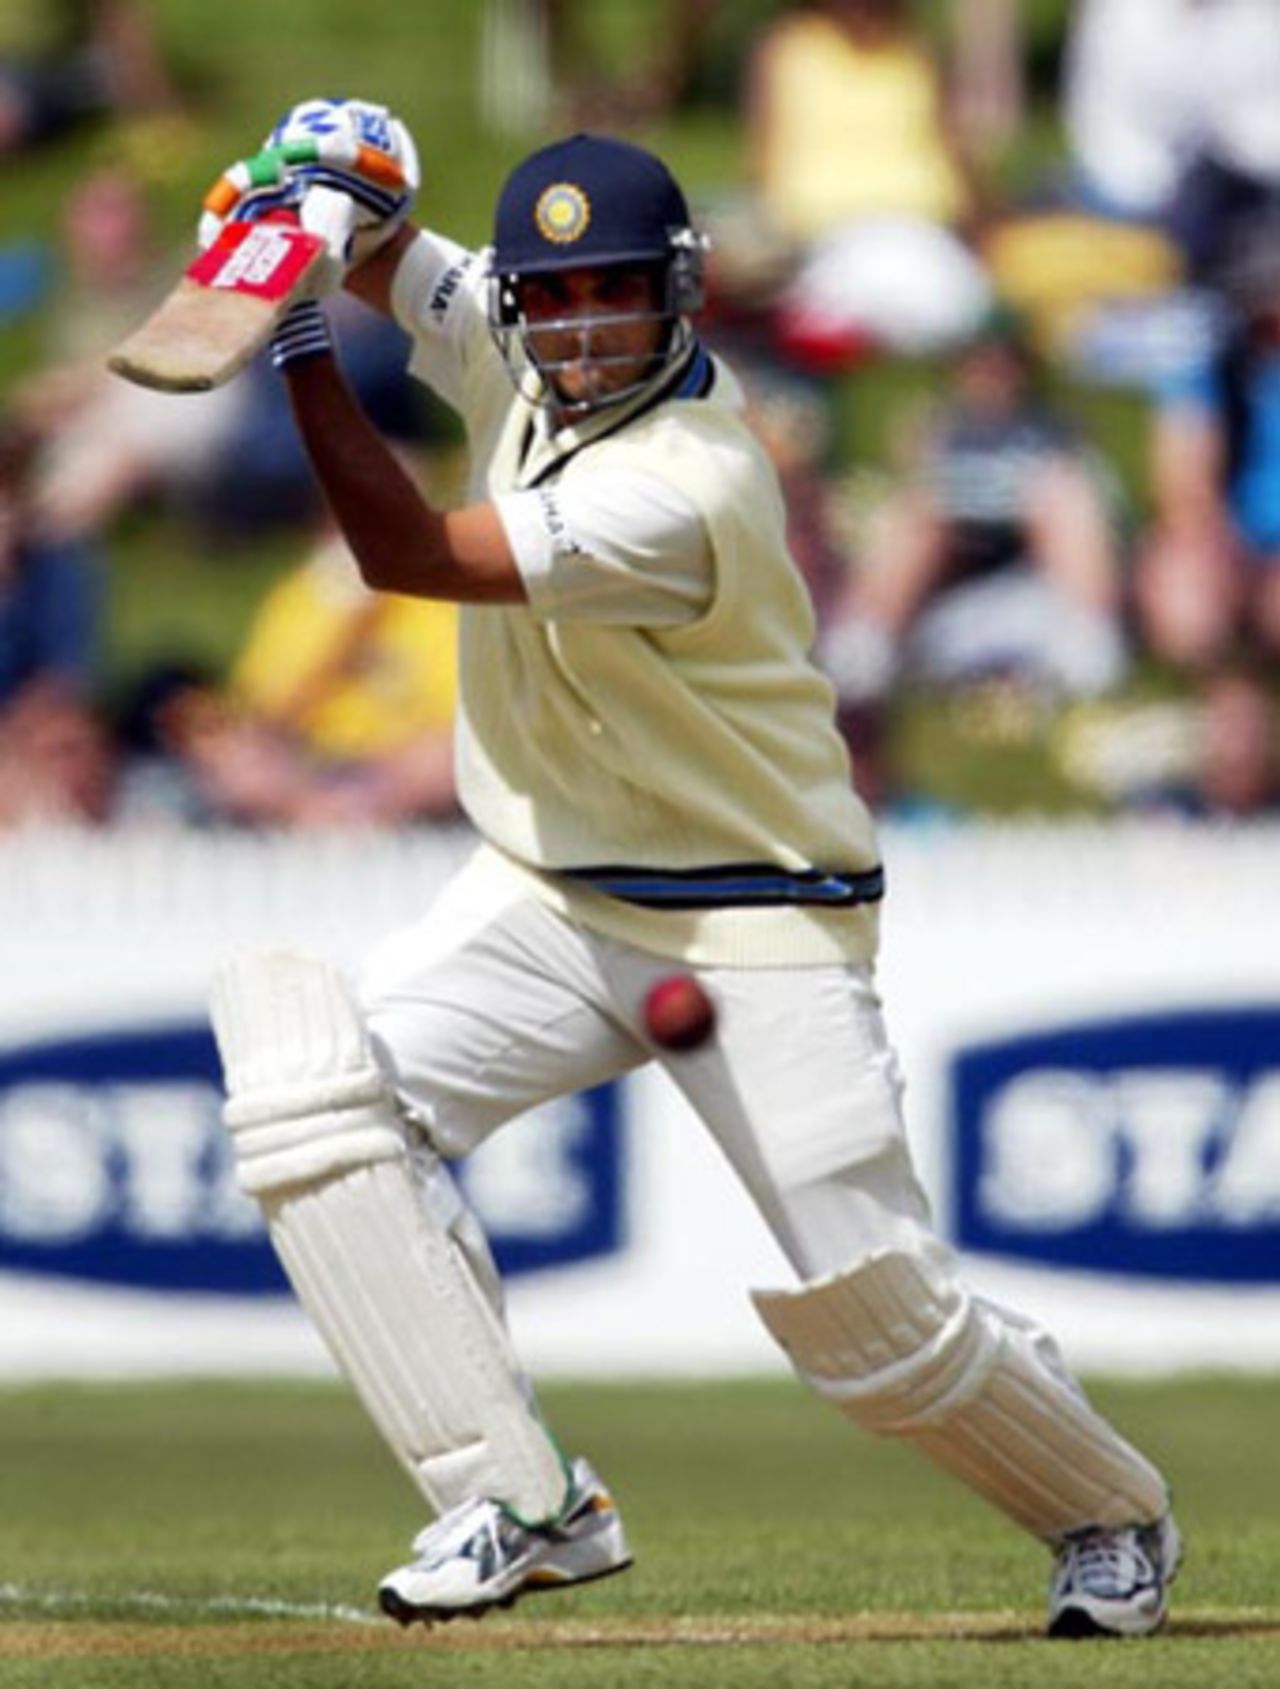 Indian batsman Sourav Ganguly drives a delivery through the covers during his second innings of five. 2nd Test: New Zealand v India at Westpac Park, Hamilton, 19-23 December 2002 (21 December 2002).